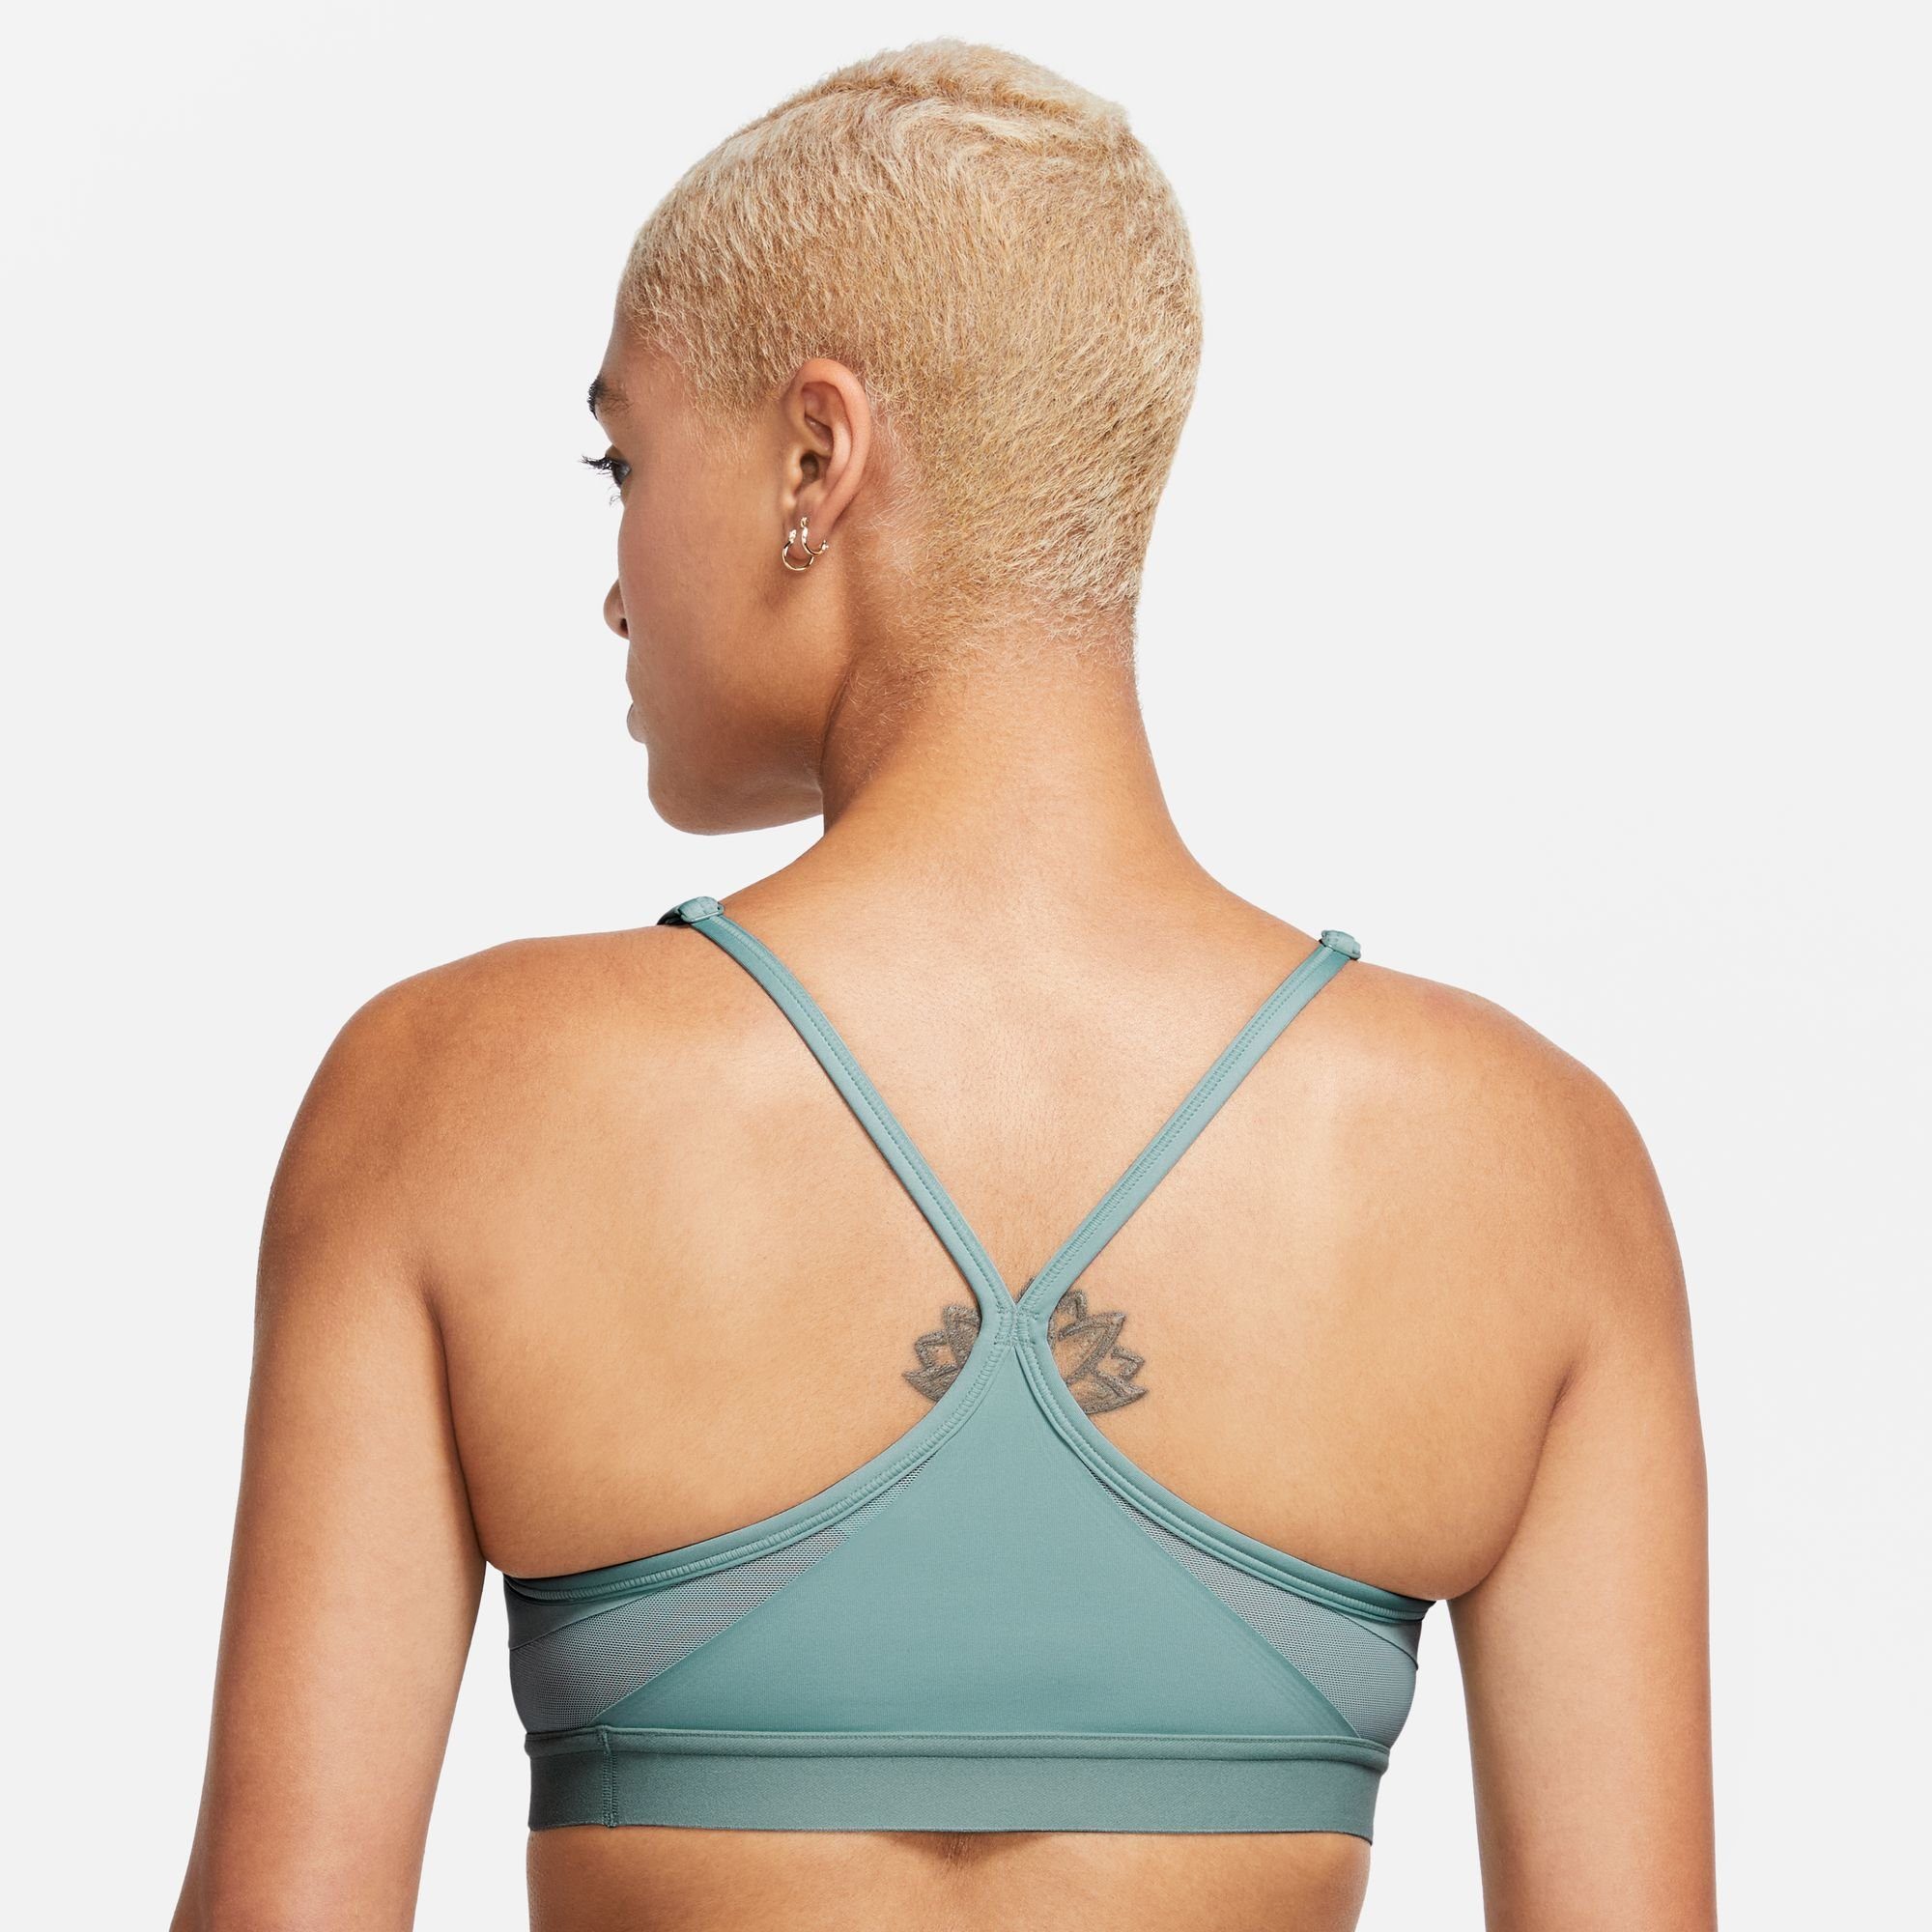 MINERAL/MINERAL/MINERAL/WHITE INDY LIGHT-SUPPORT WOMEN'S V-NECK BRA Sport-BH Nike SPORTS PADDED